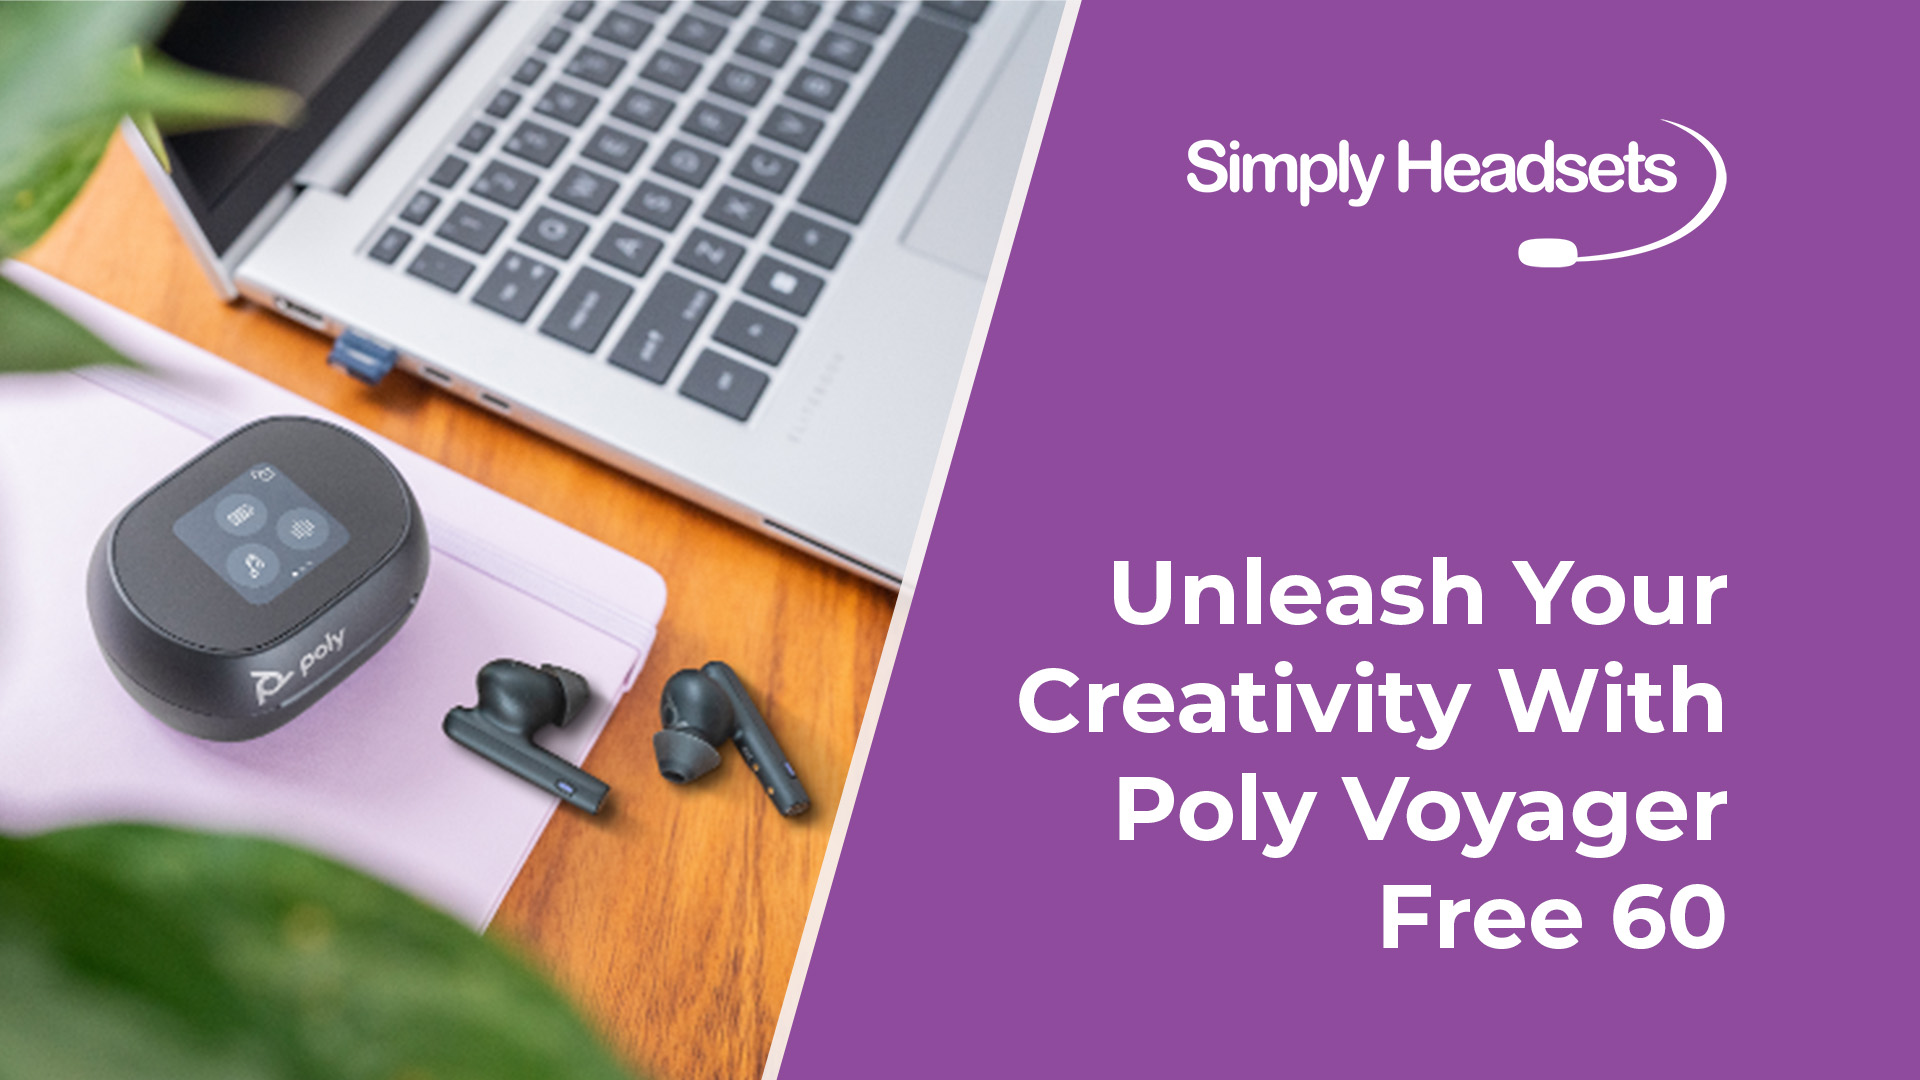 Poly Voyager Free 60 earbuds on a desk next to a laptop